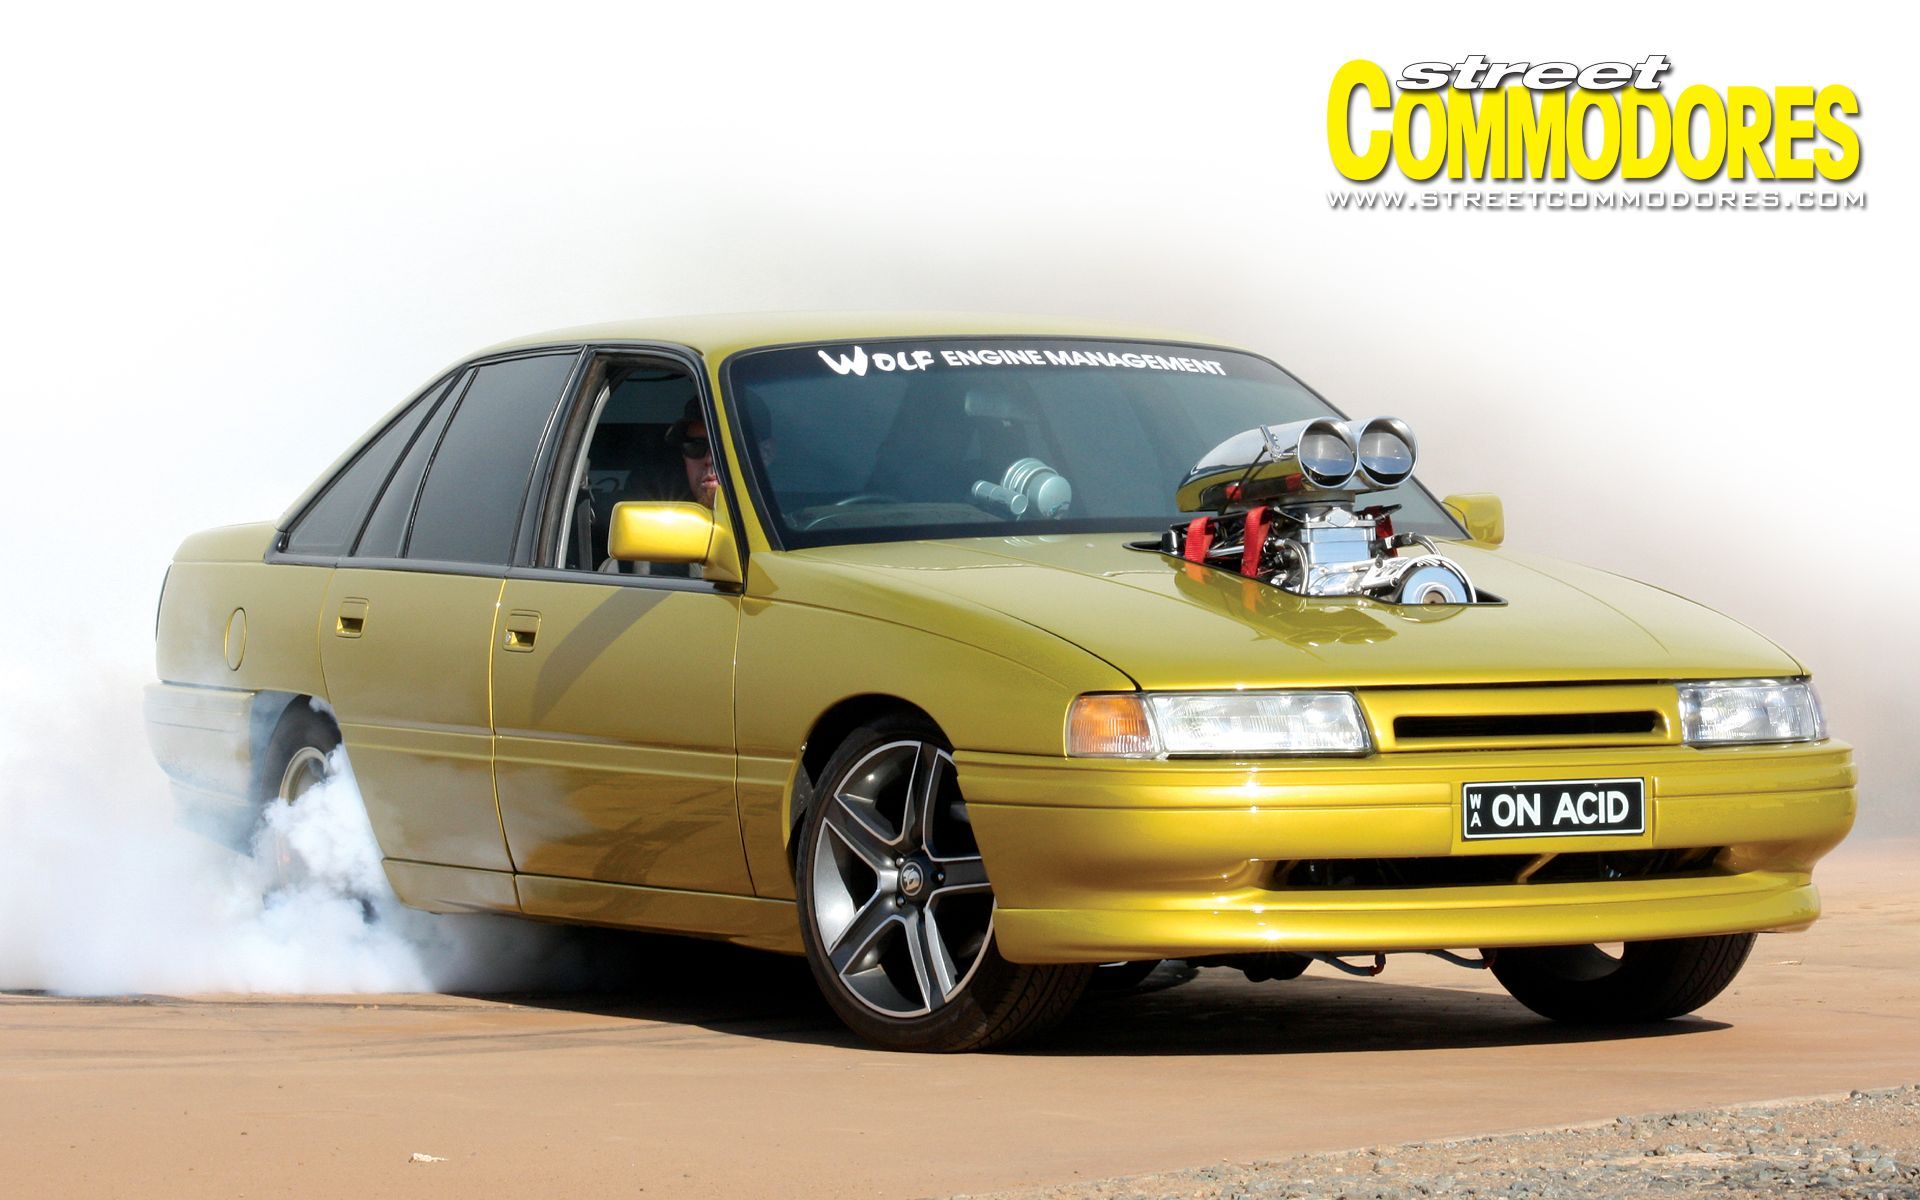 Holden Commodore Wallpaper Free Holden Commodore Background